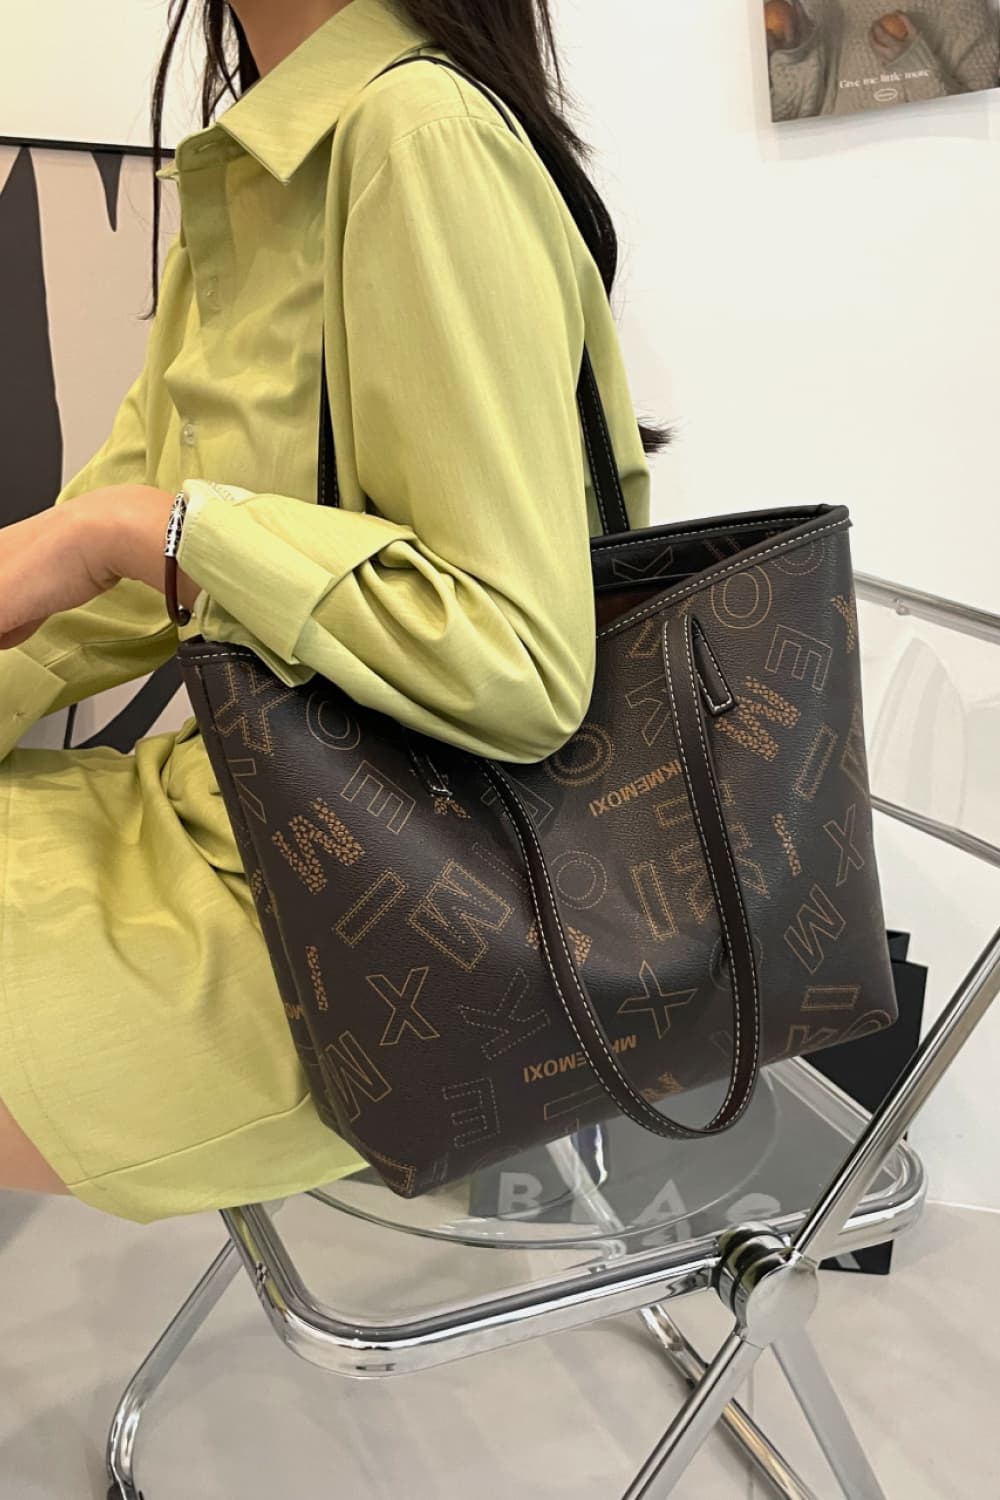 Louis Vuitton Neverfull Bags for sale in Baltimore, Maryland